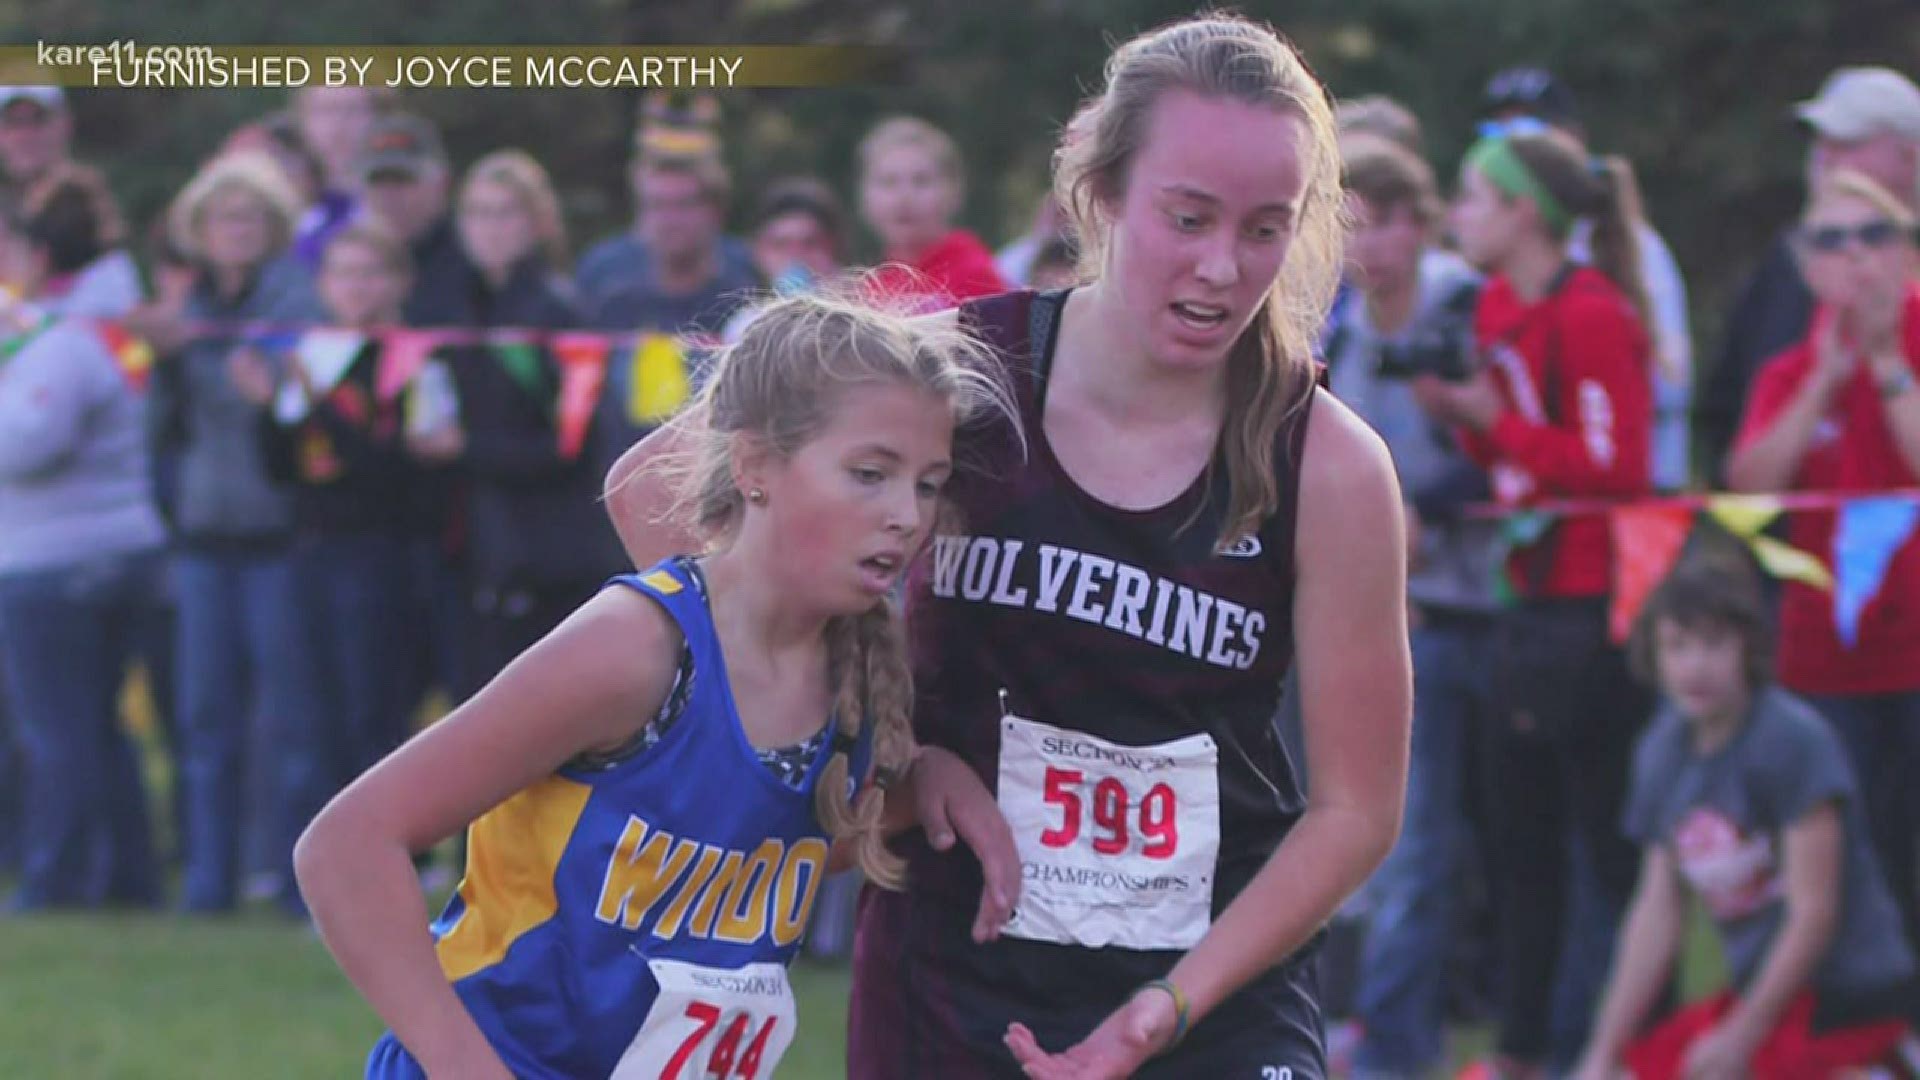 In 2016 Liana Blomgren was disqualified from her last high school cross country race after helping struggling competitor Gracie Bucher cross the finish line